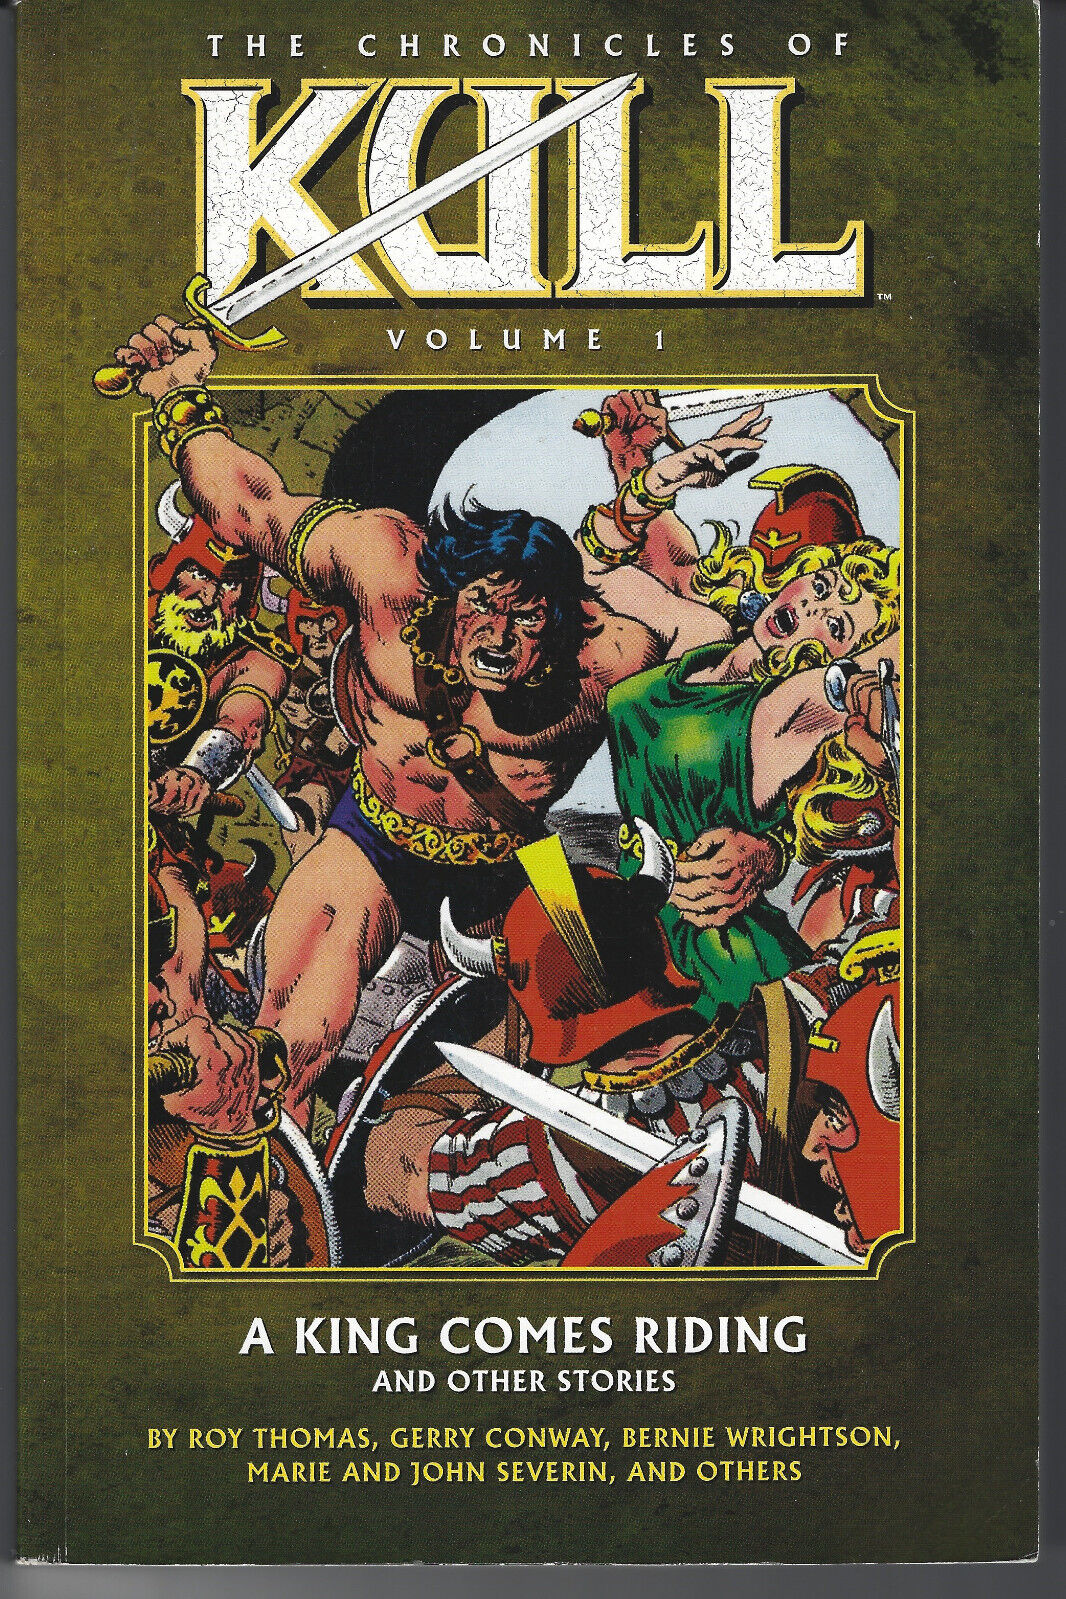 The Chronicles of Kull Volume 1 A King Comes Riding and Other Stories softcover